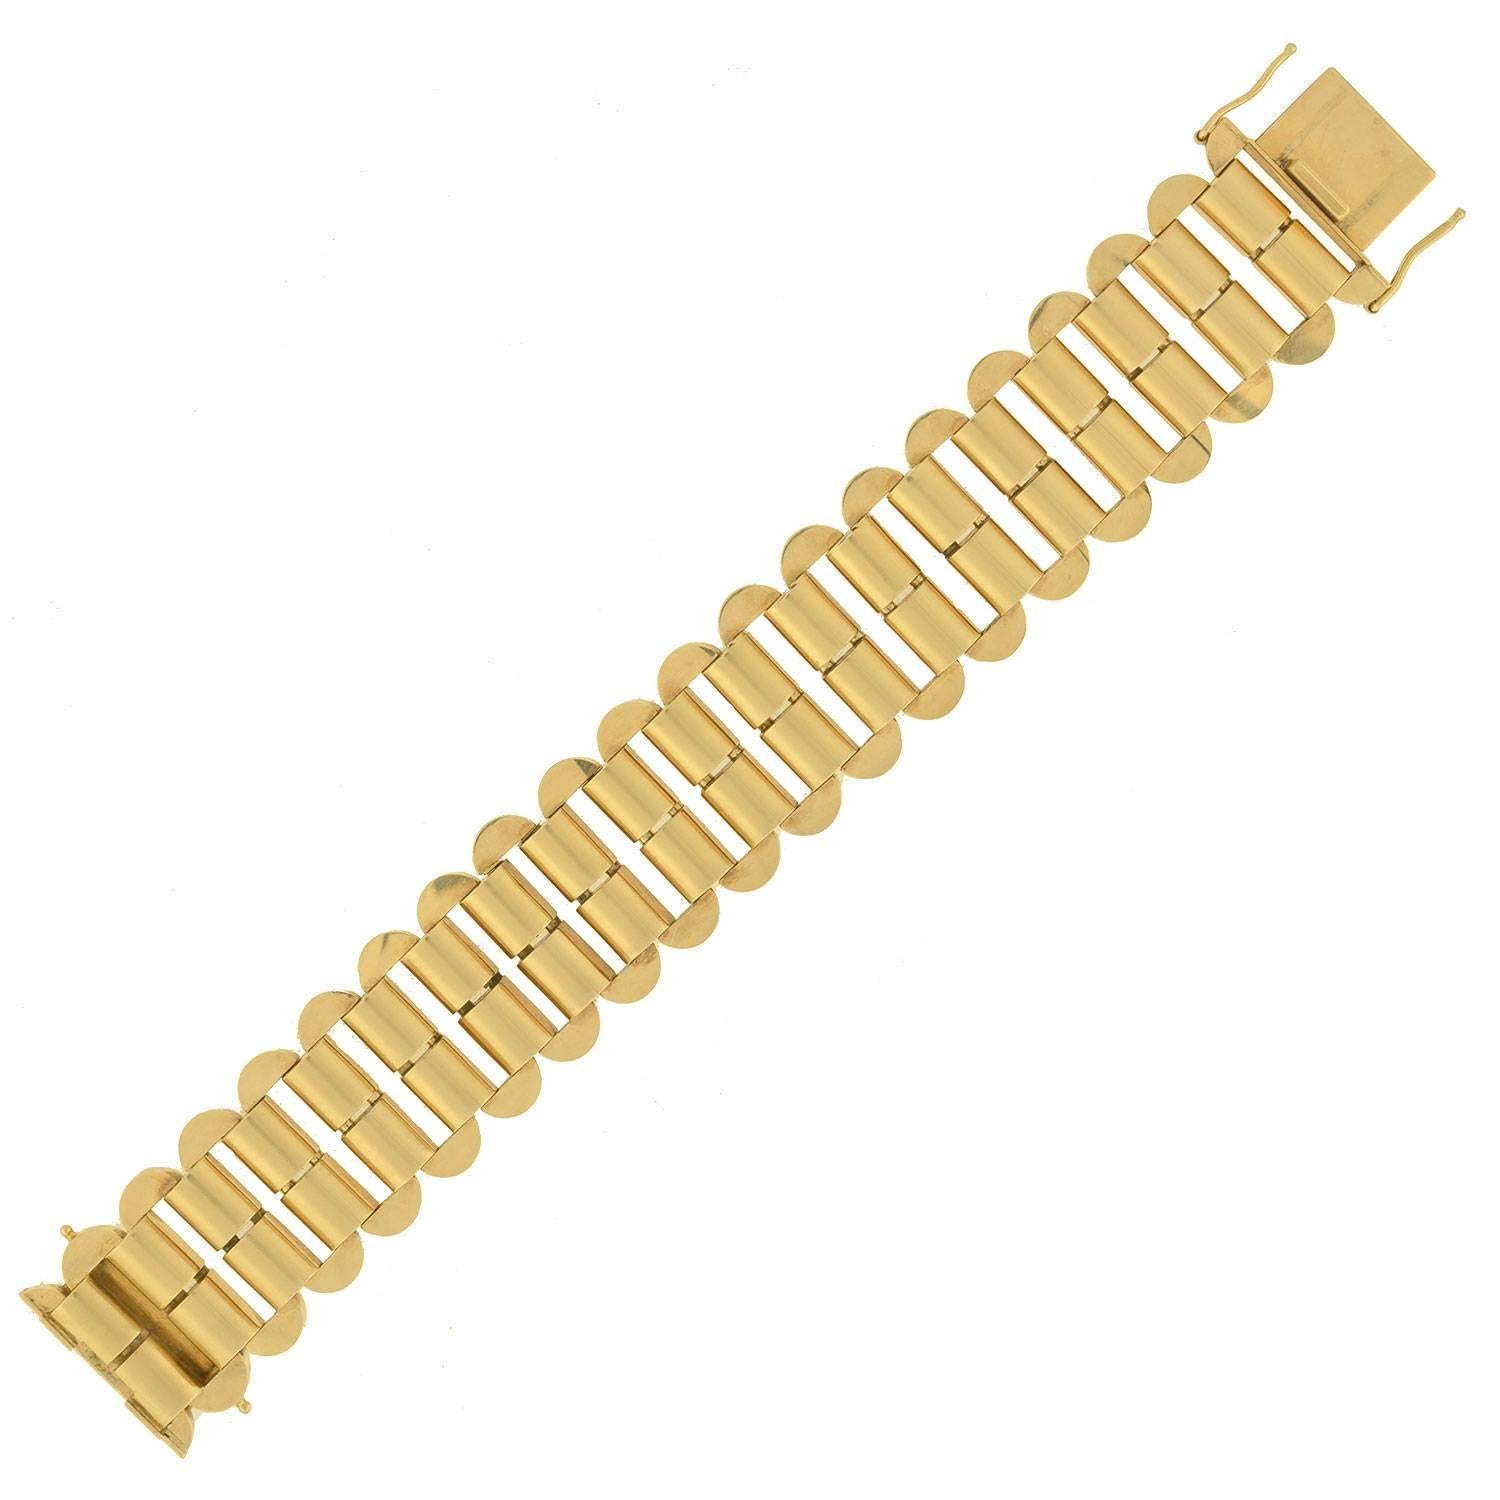 A stunning and unusual gold link bracelet from the Retro (ca1940) era! This fabulous piece is made of 14kt yellow gold and looks absolutely striking on. The piece is comprised of 19 links that are oval in shape and alternate with rounded bar